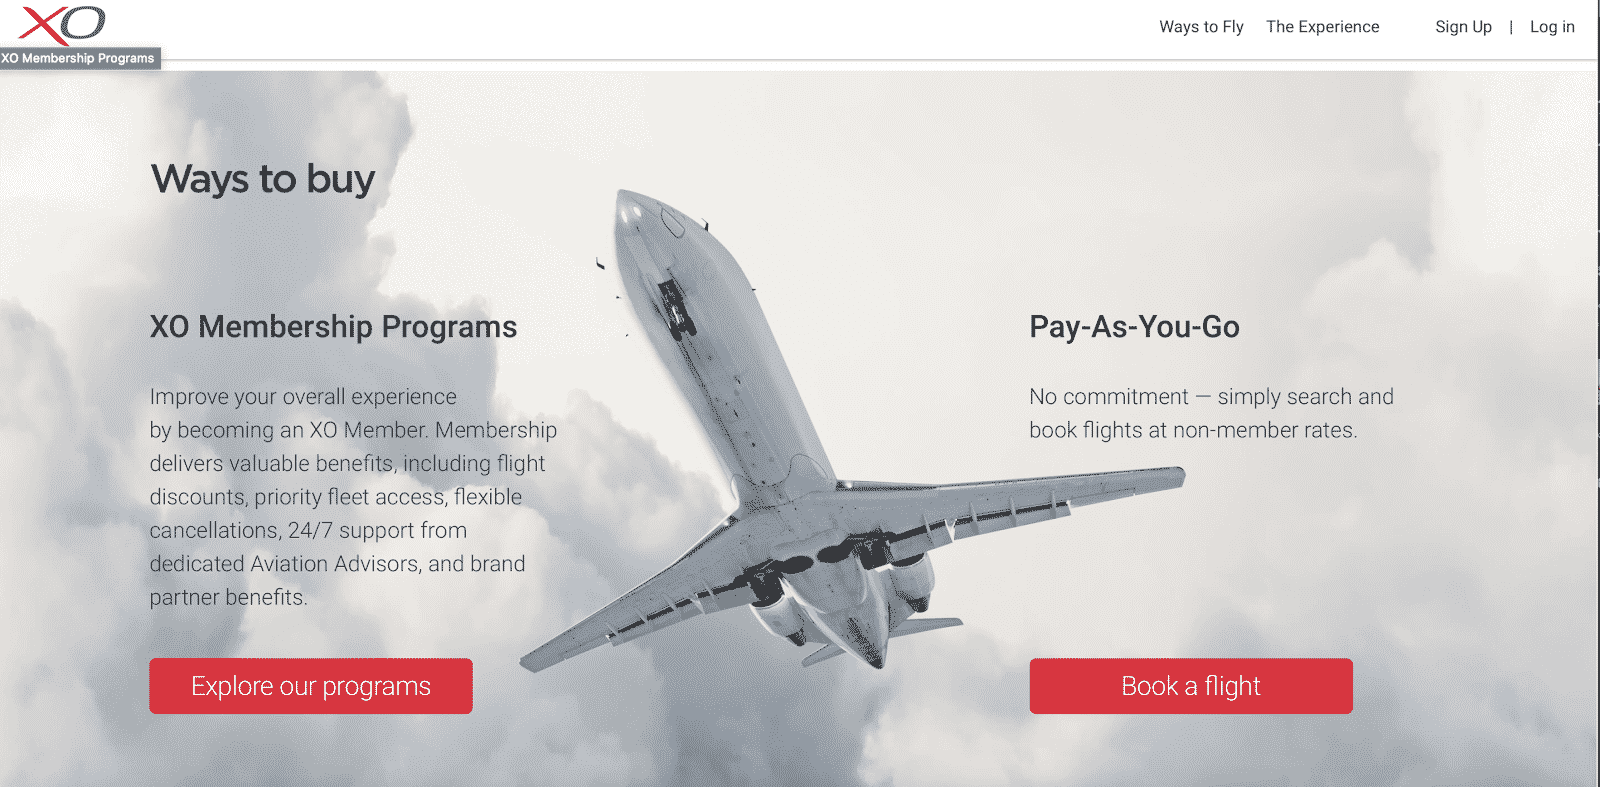 The XOJET Ways to Buy webpage